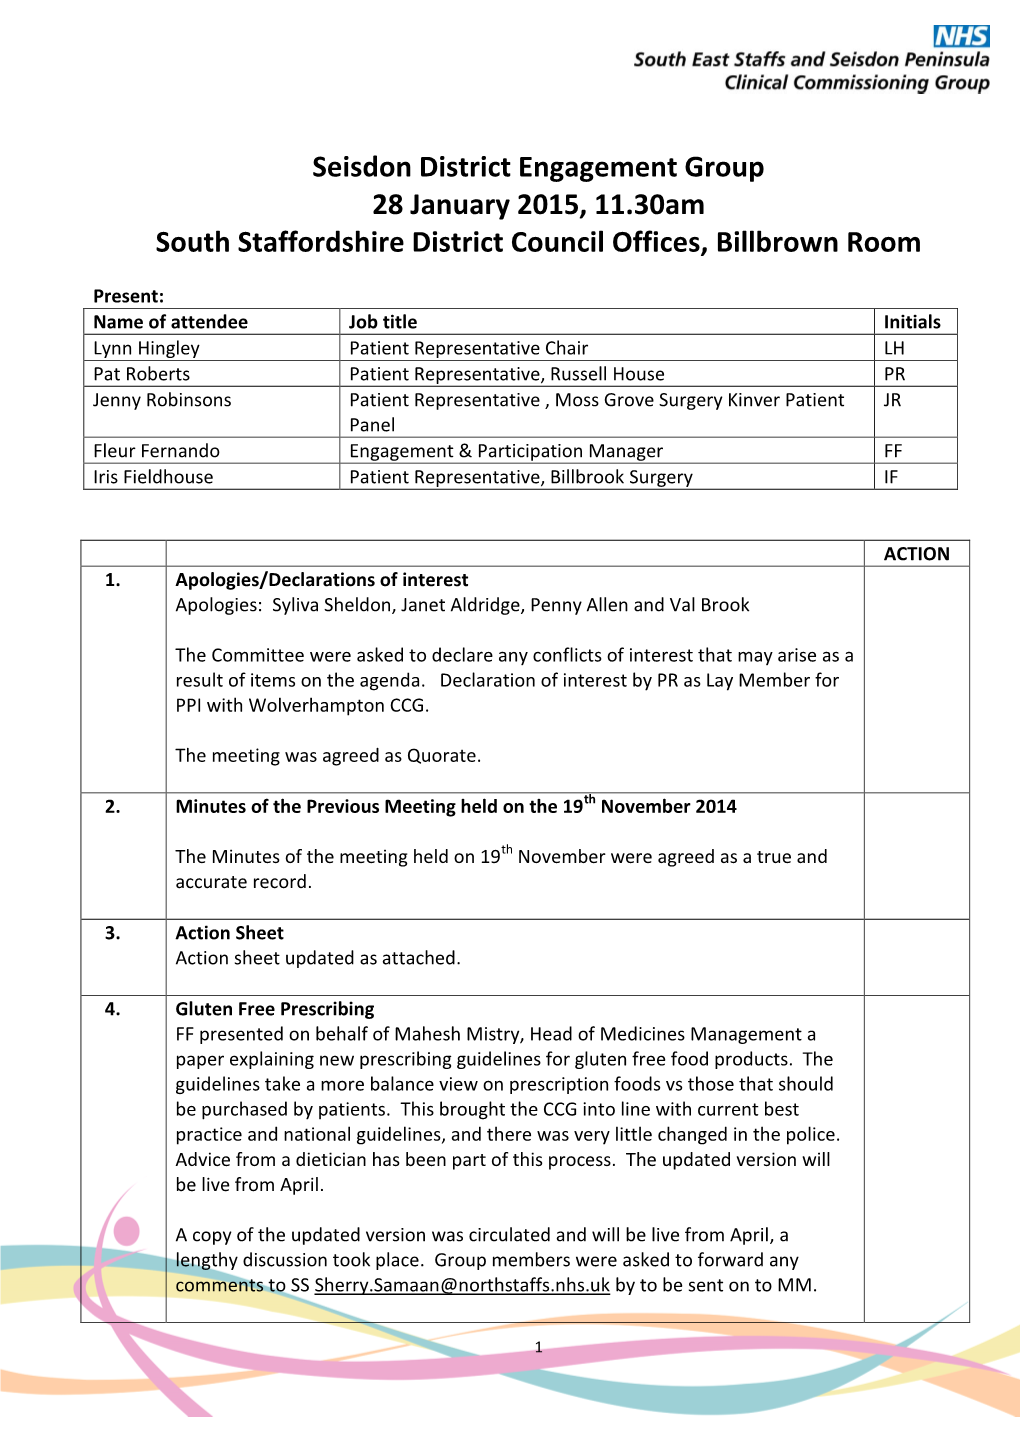 Seisdon District Engagement Group 28 January 2015, 11.30Am South Staffordshire District Council Offices, Billbrown Room